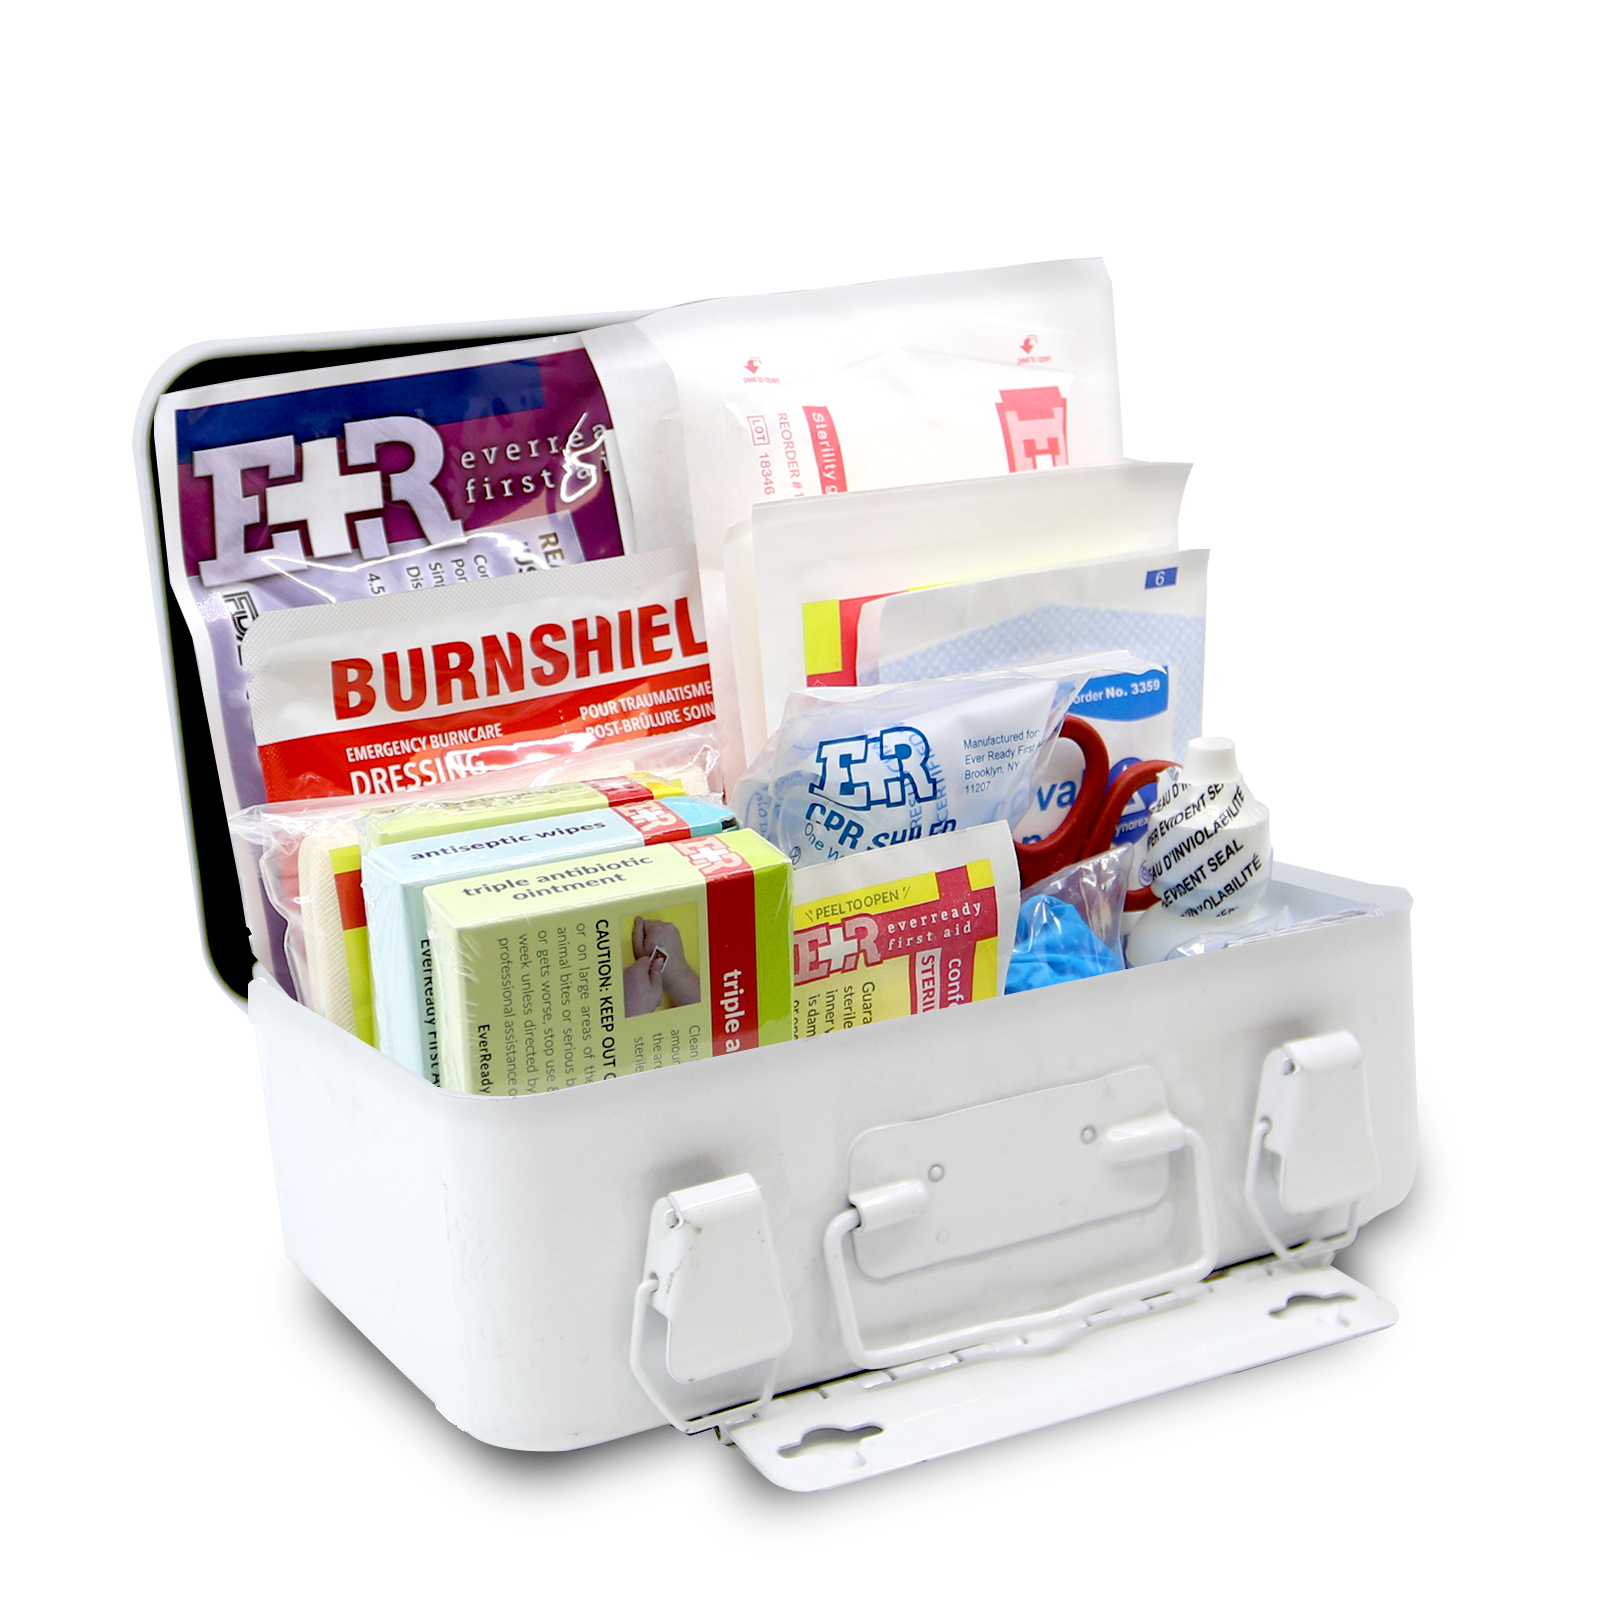 Ever Ready First Aid 10 Person First Aid Kit with Metal Case, Type III, Ansi A, OSHA Compliant